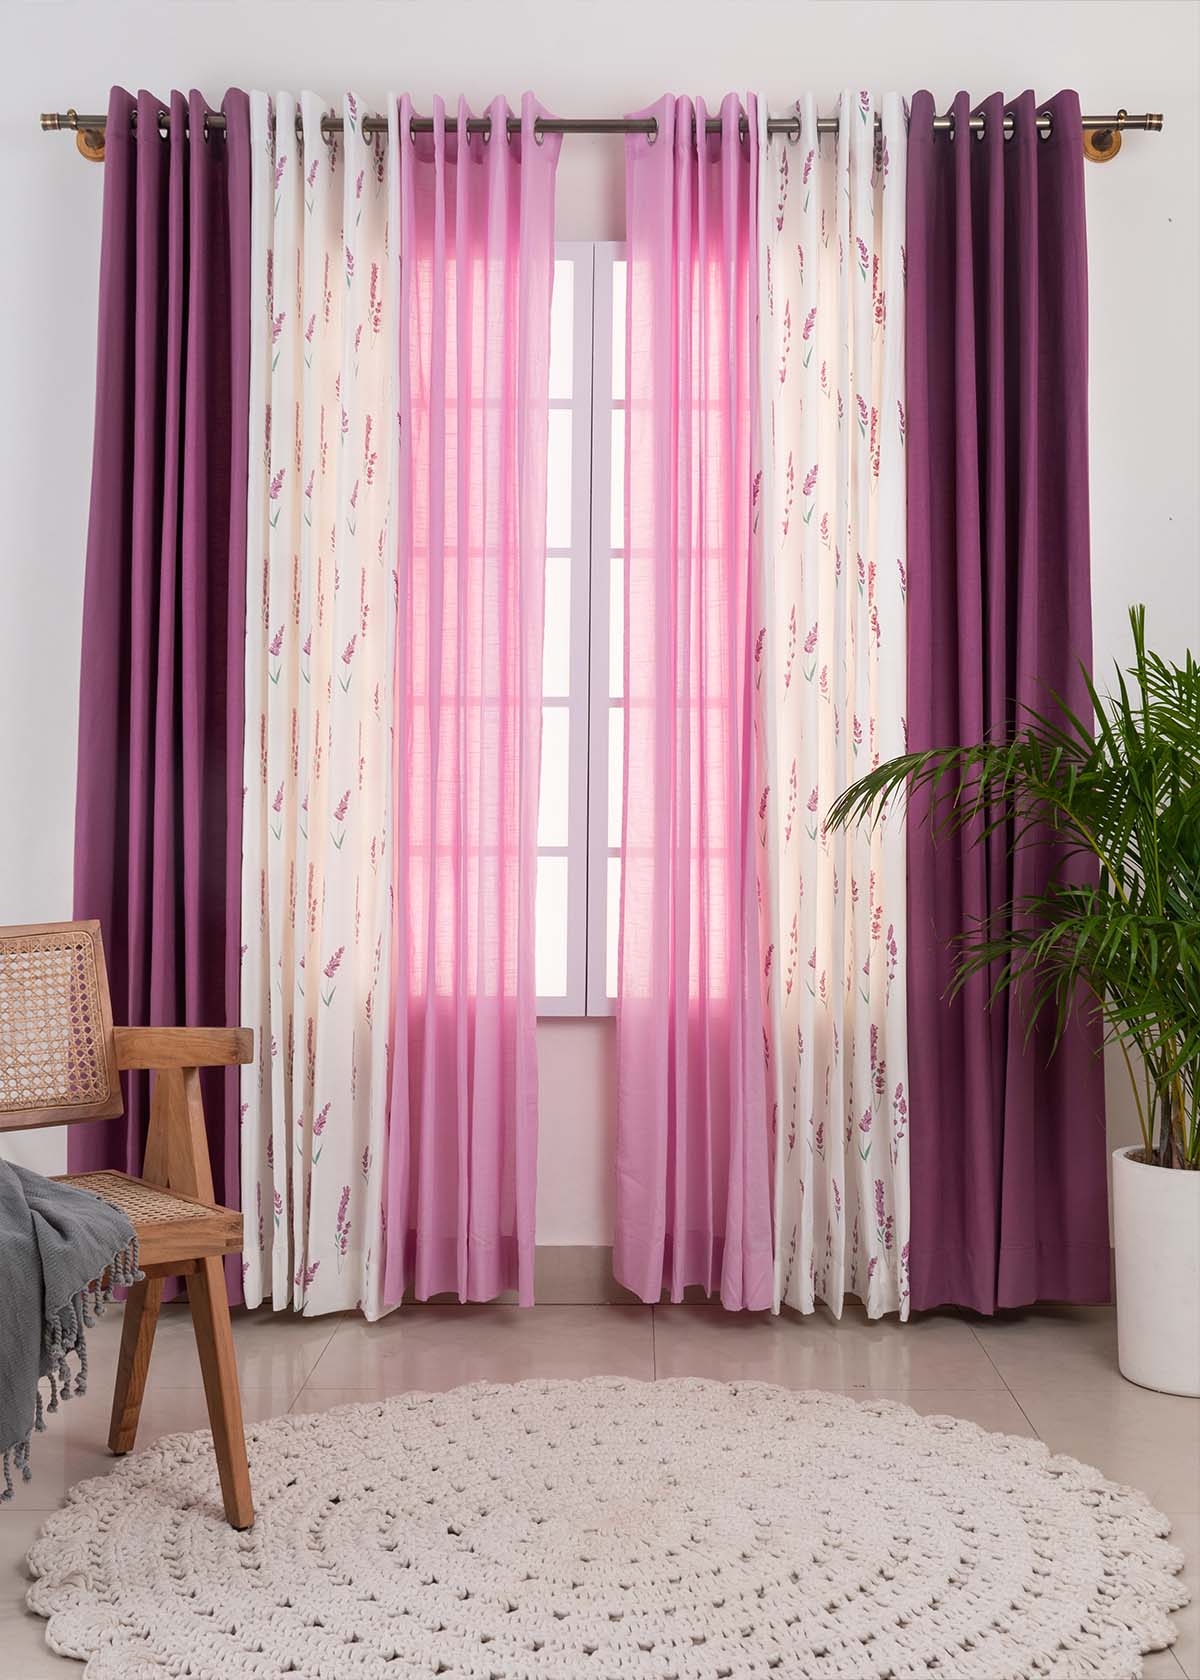 Grape Solid, Fields Of Lavender, Dusty Lavender Sheer Set Of 3 Combo Cotton Curtain - Grape Lavender